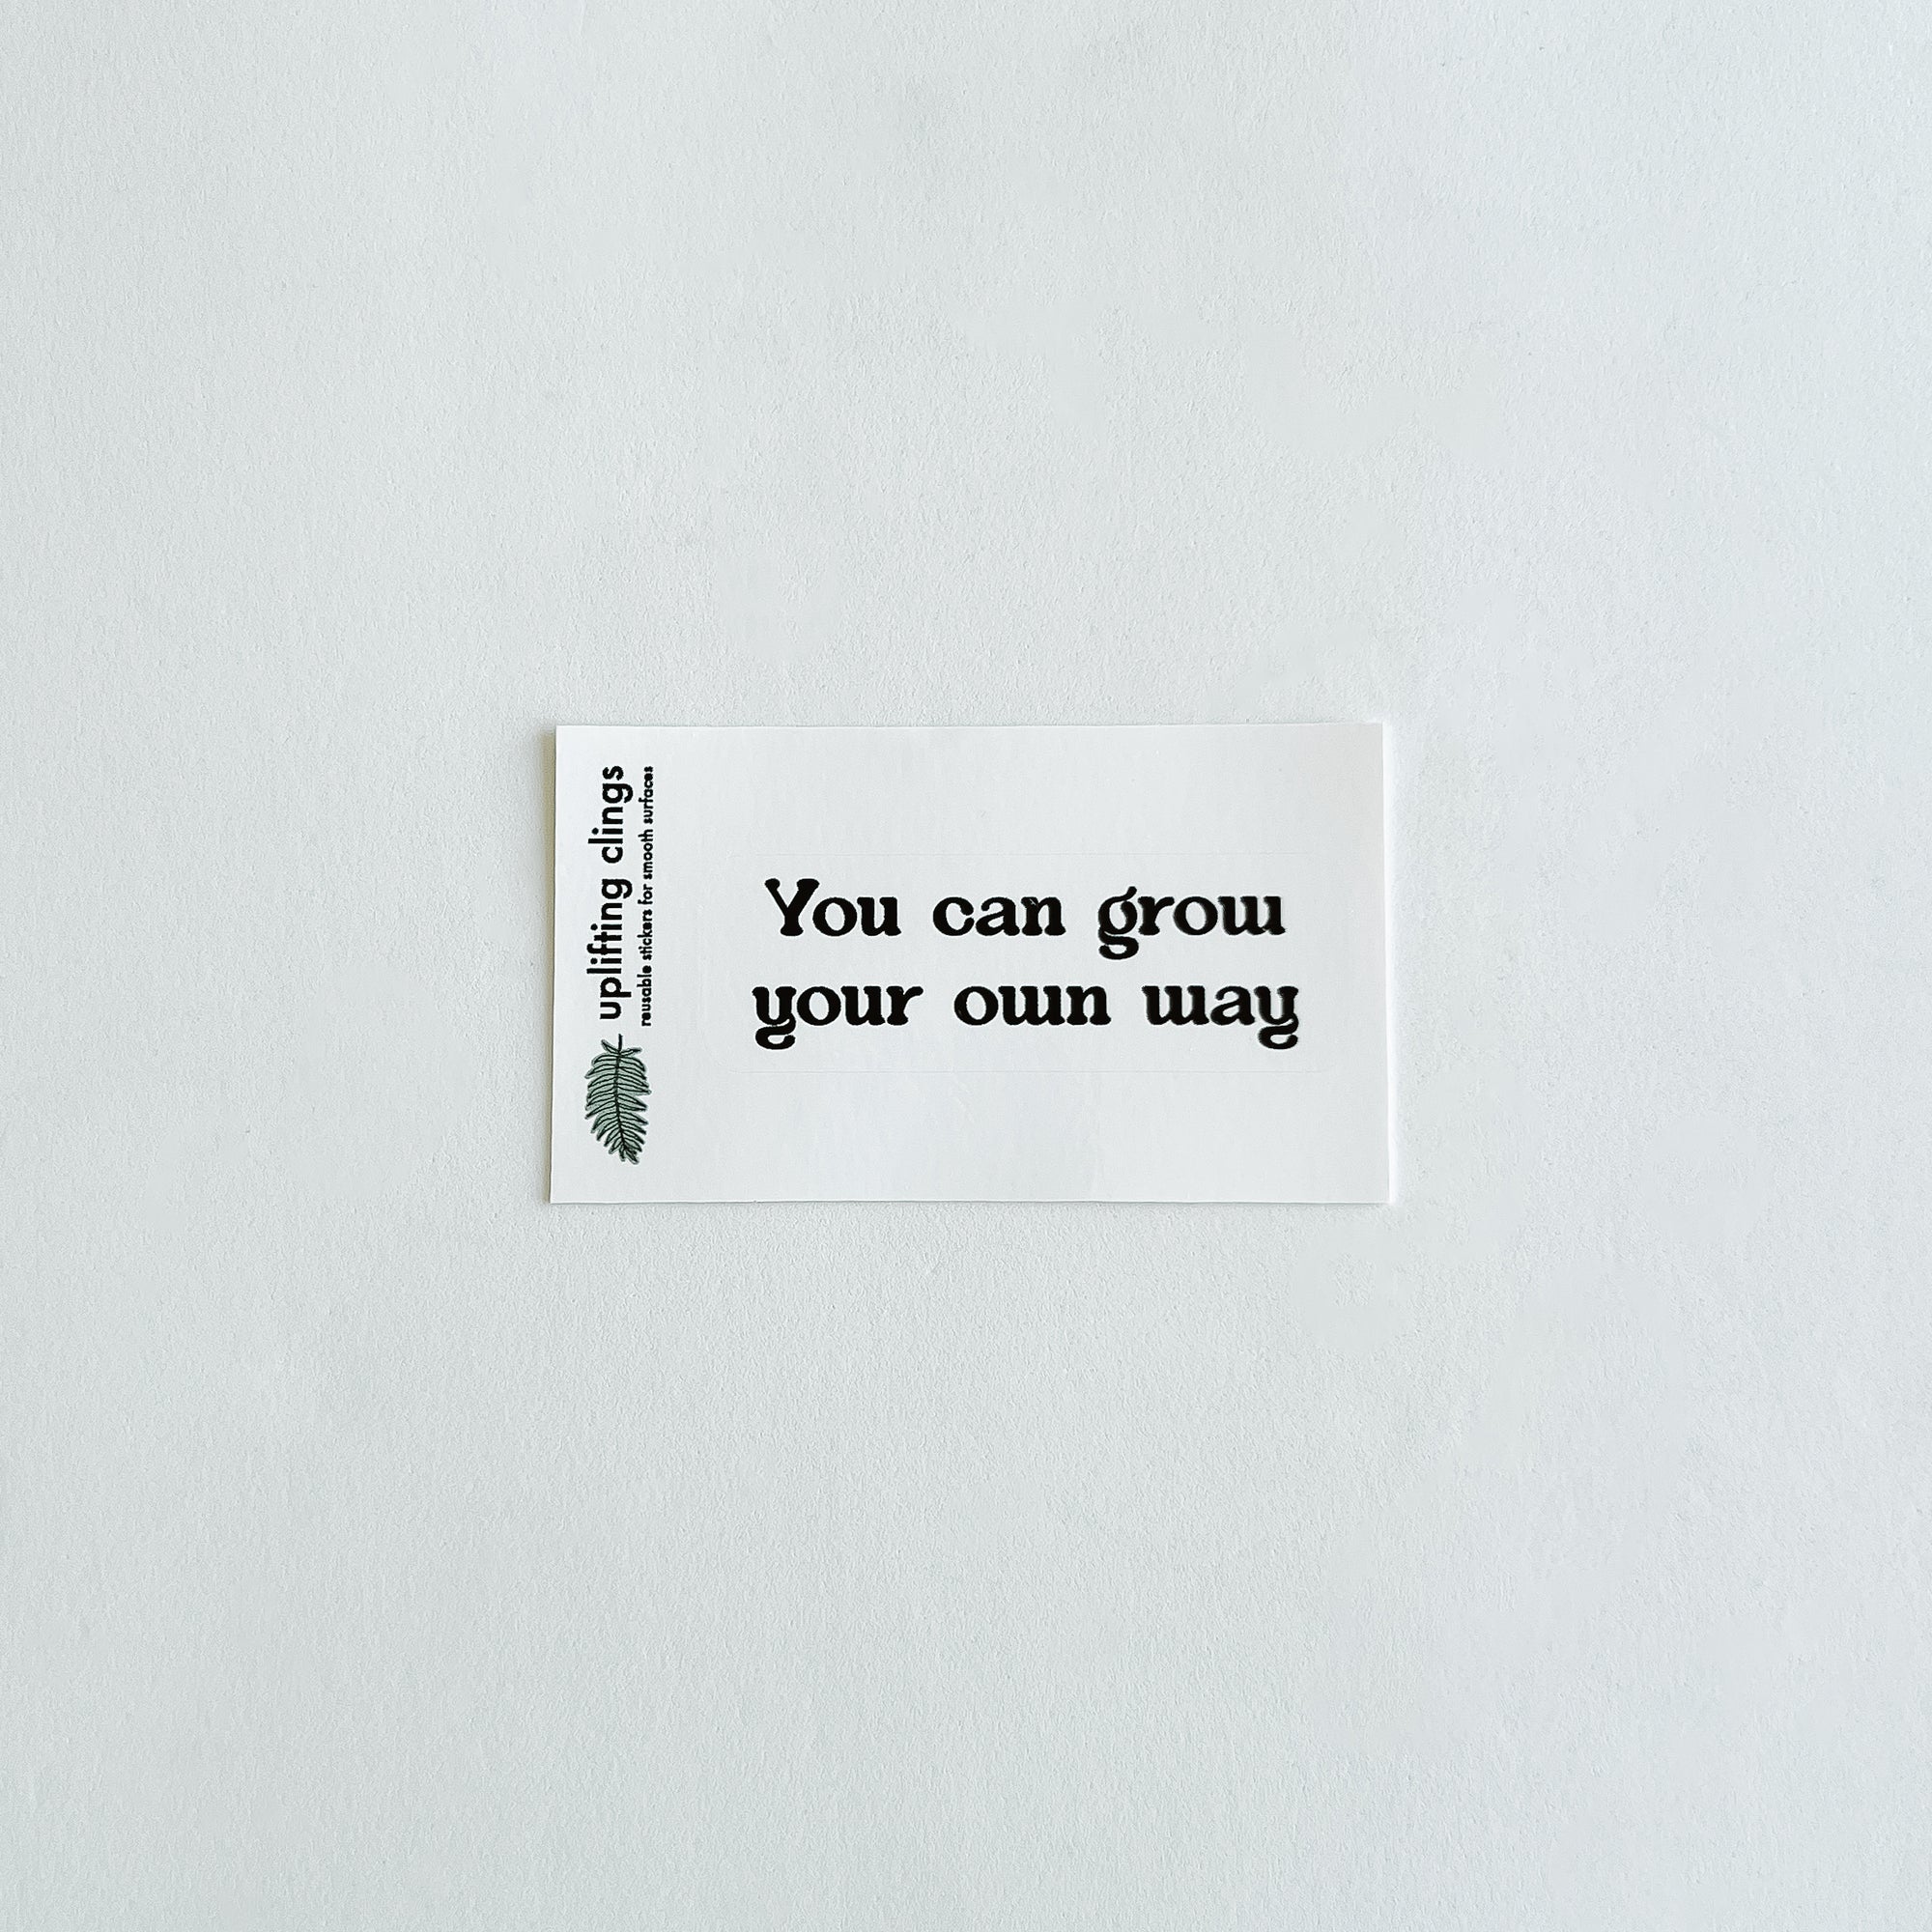 Uplifting | Grow | Quote Clings